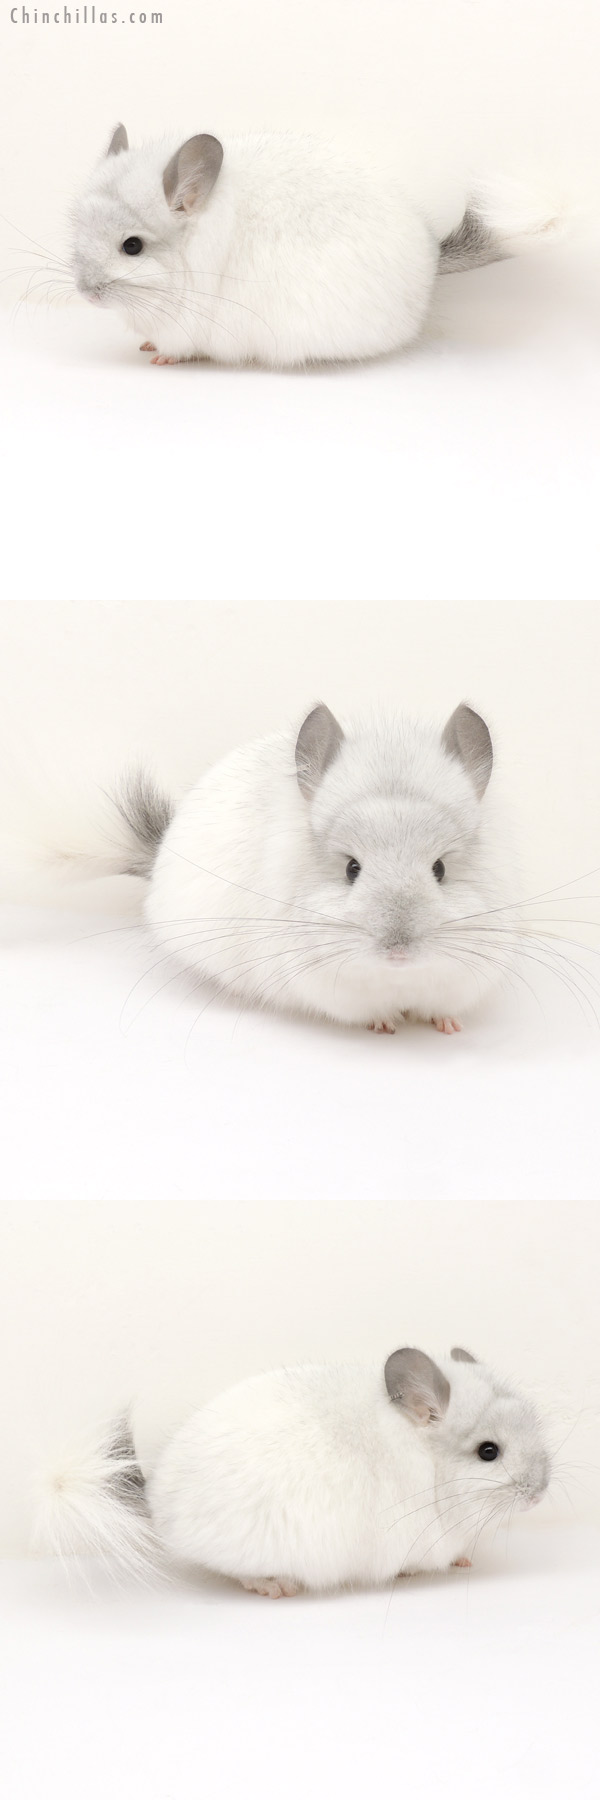 Chinchilla or related item offered for sale or export on Chinchillas.com - 13222 Exceptional White Mosaic Royal Persian Angora Female Chinchilla